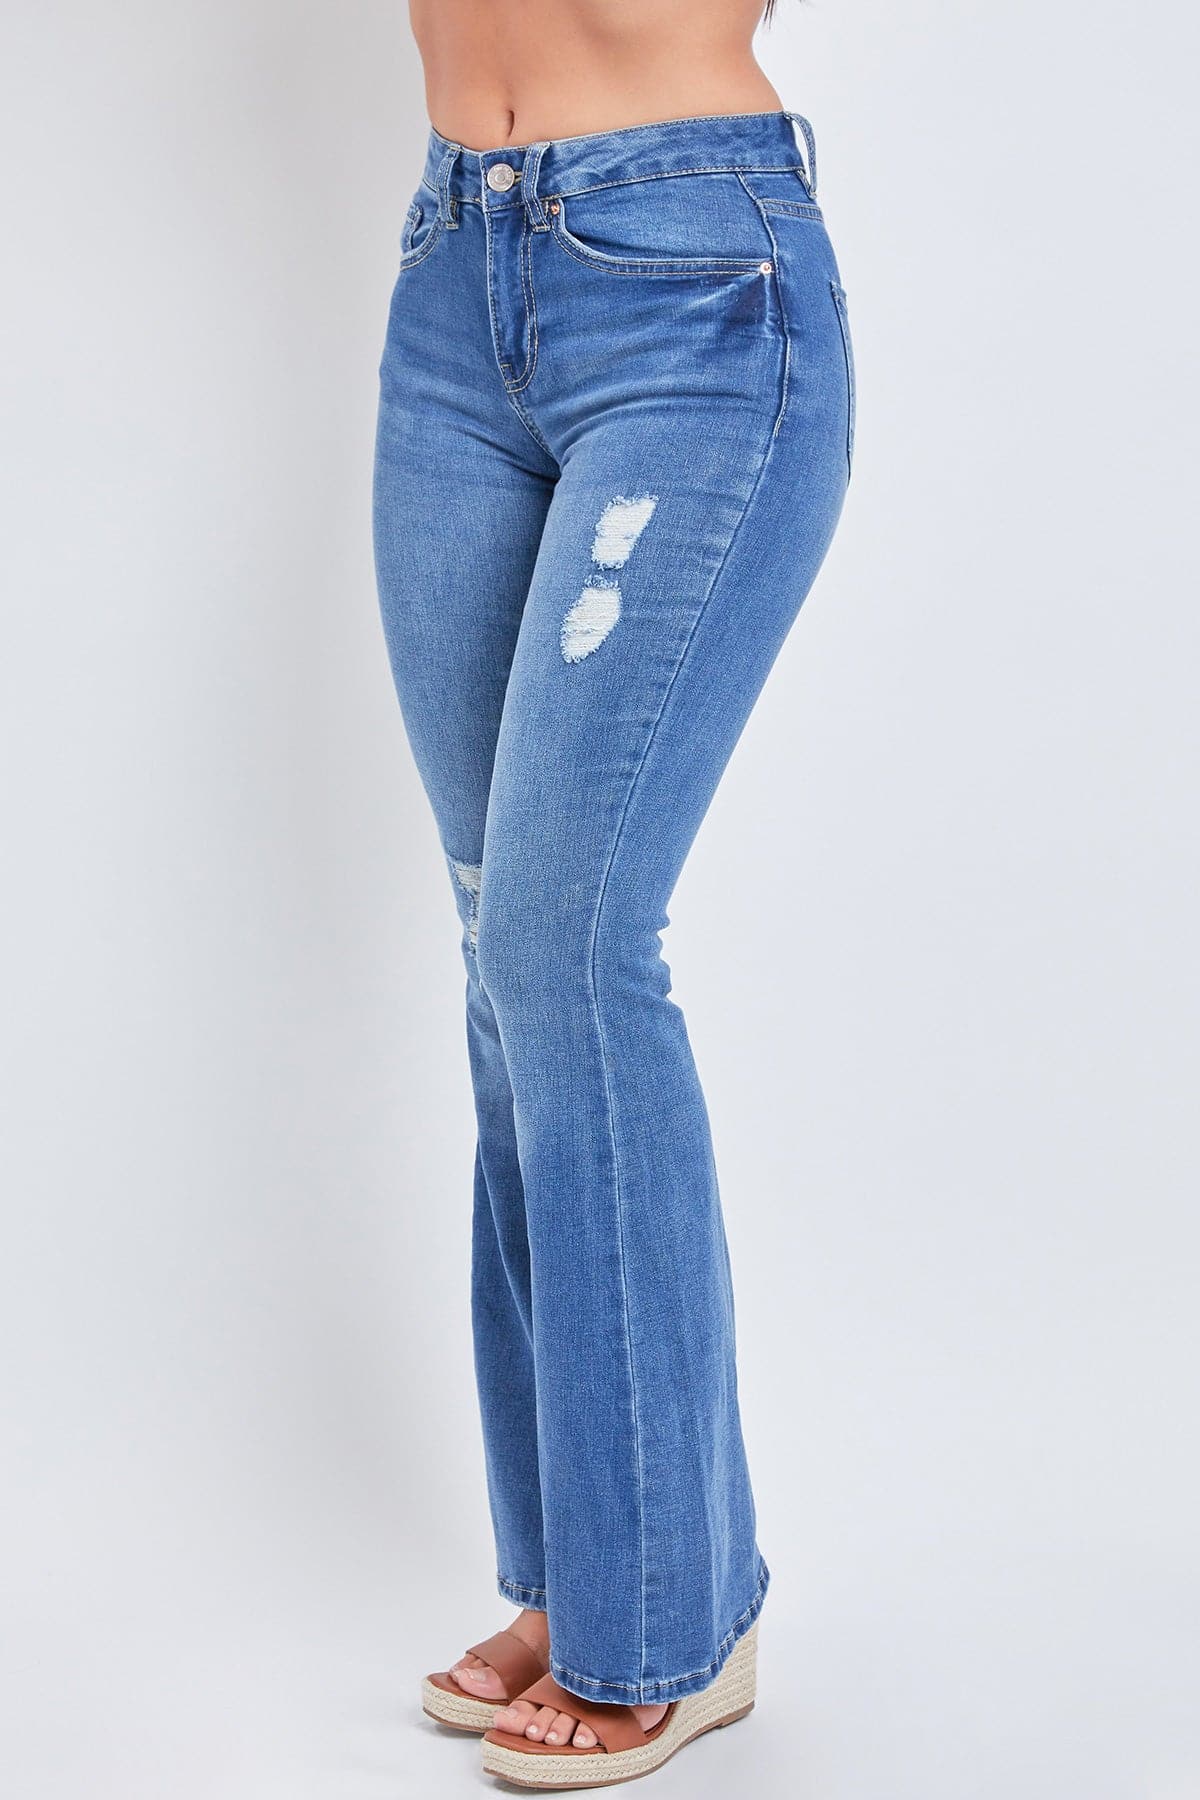 Women's Essential  Flare Jeans - Long Inseam